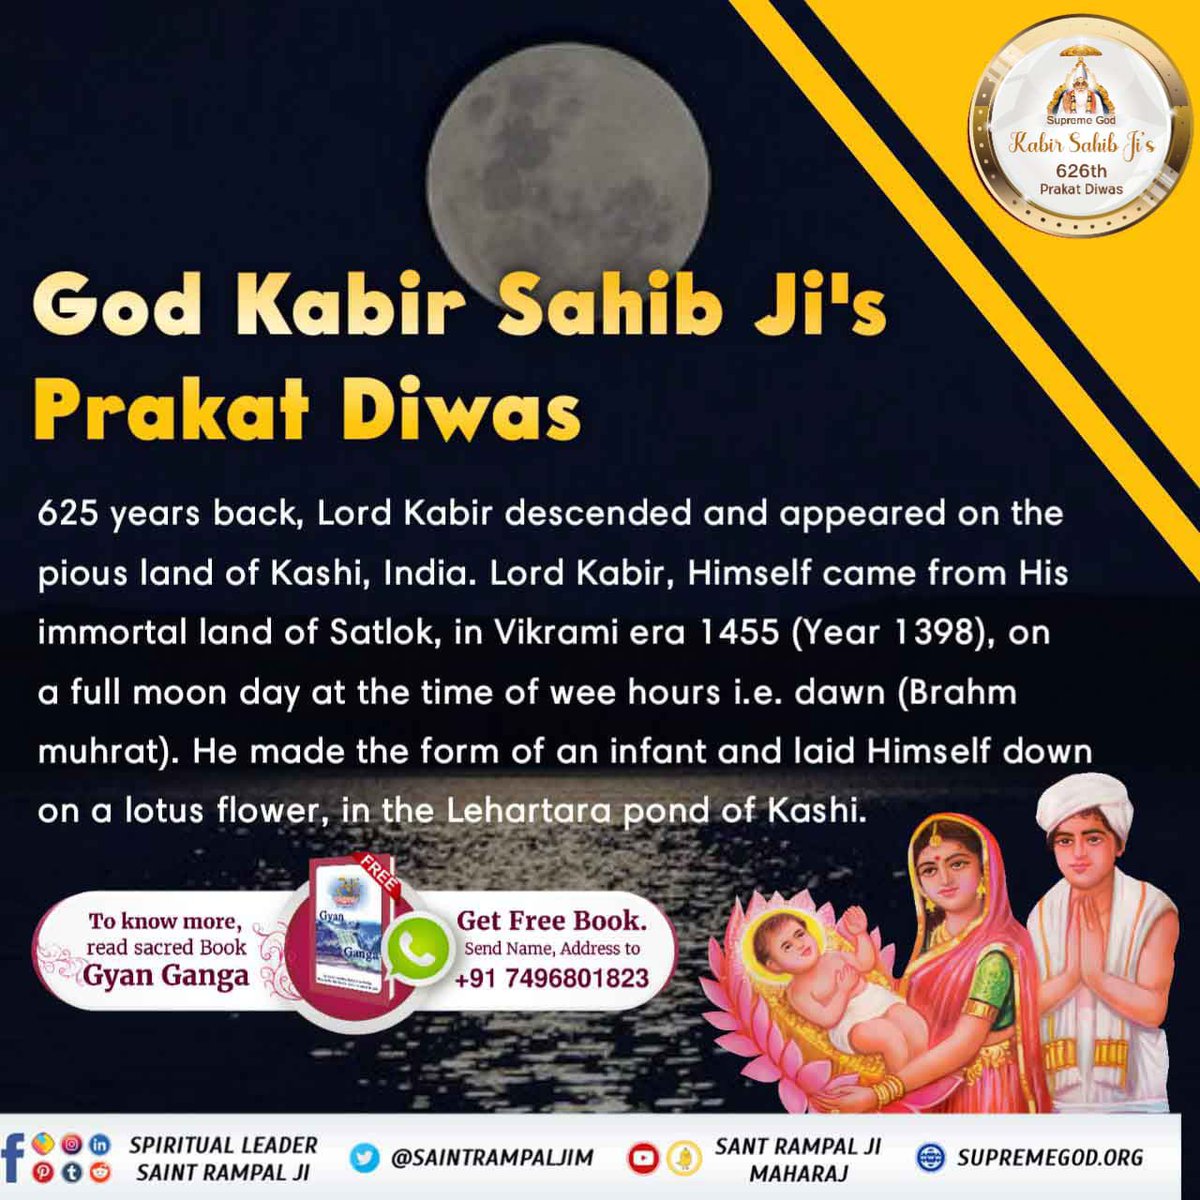 #कबीरजी_का_कलयुगमें_प्राकट्य

When Kabir Saheb appeared in the form of a baby in Kashi, whole inhabitants came there to see the miraculous baby.
For more information about this
Must visit Satlok Aashram YouTube channel
3 Days Left Kabir Prakat Diwas